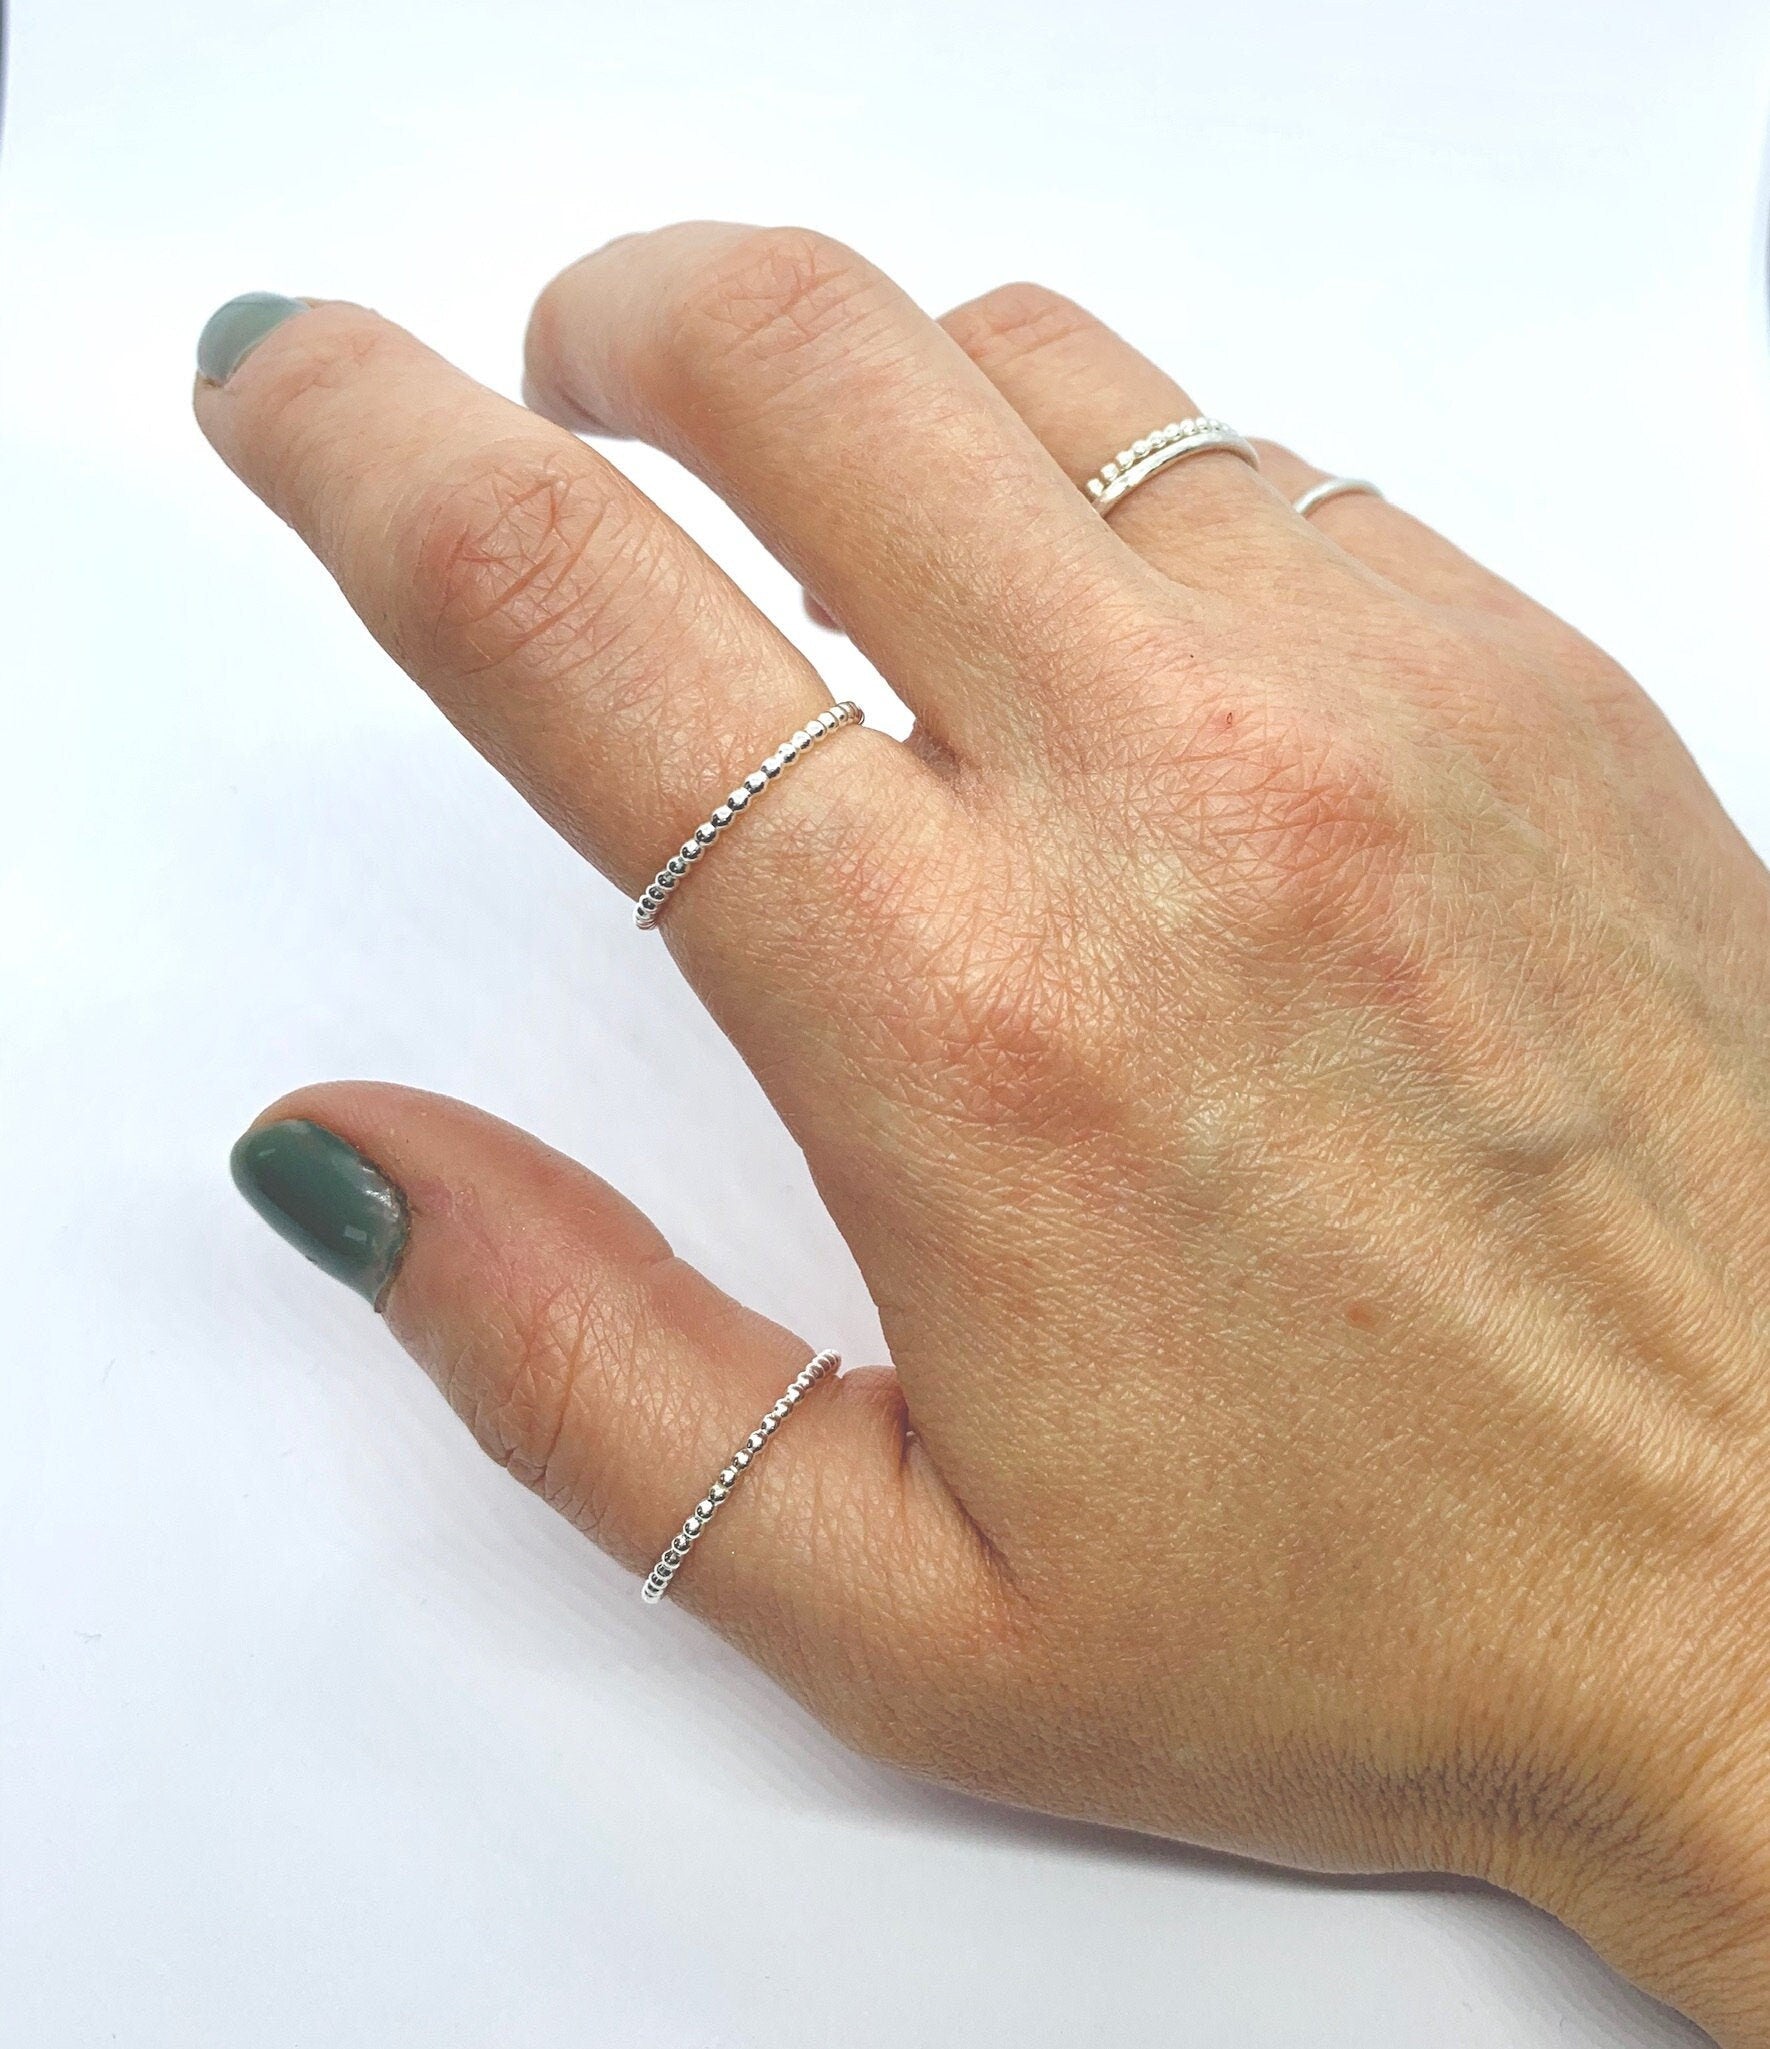 Delicate silver stacking ring